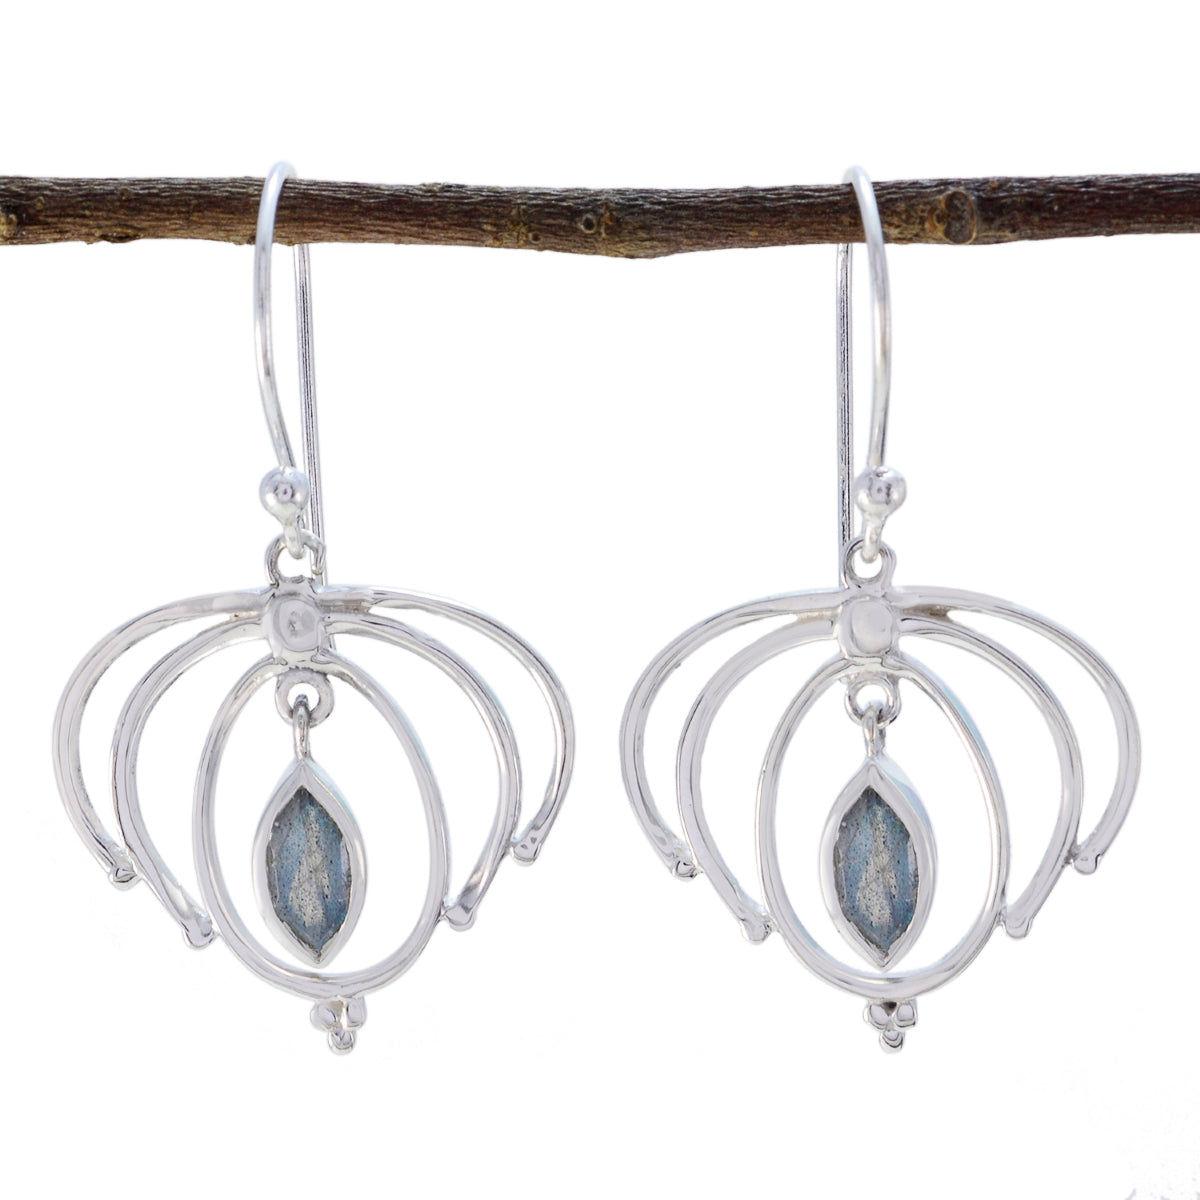 Riyo Good Gemstones Marquise Faceted Grey Labradorite Silver Earrings mother's day gift